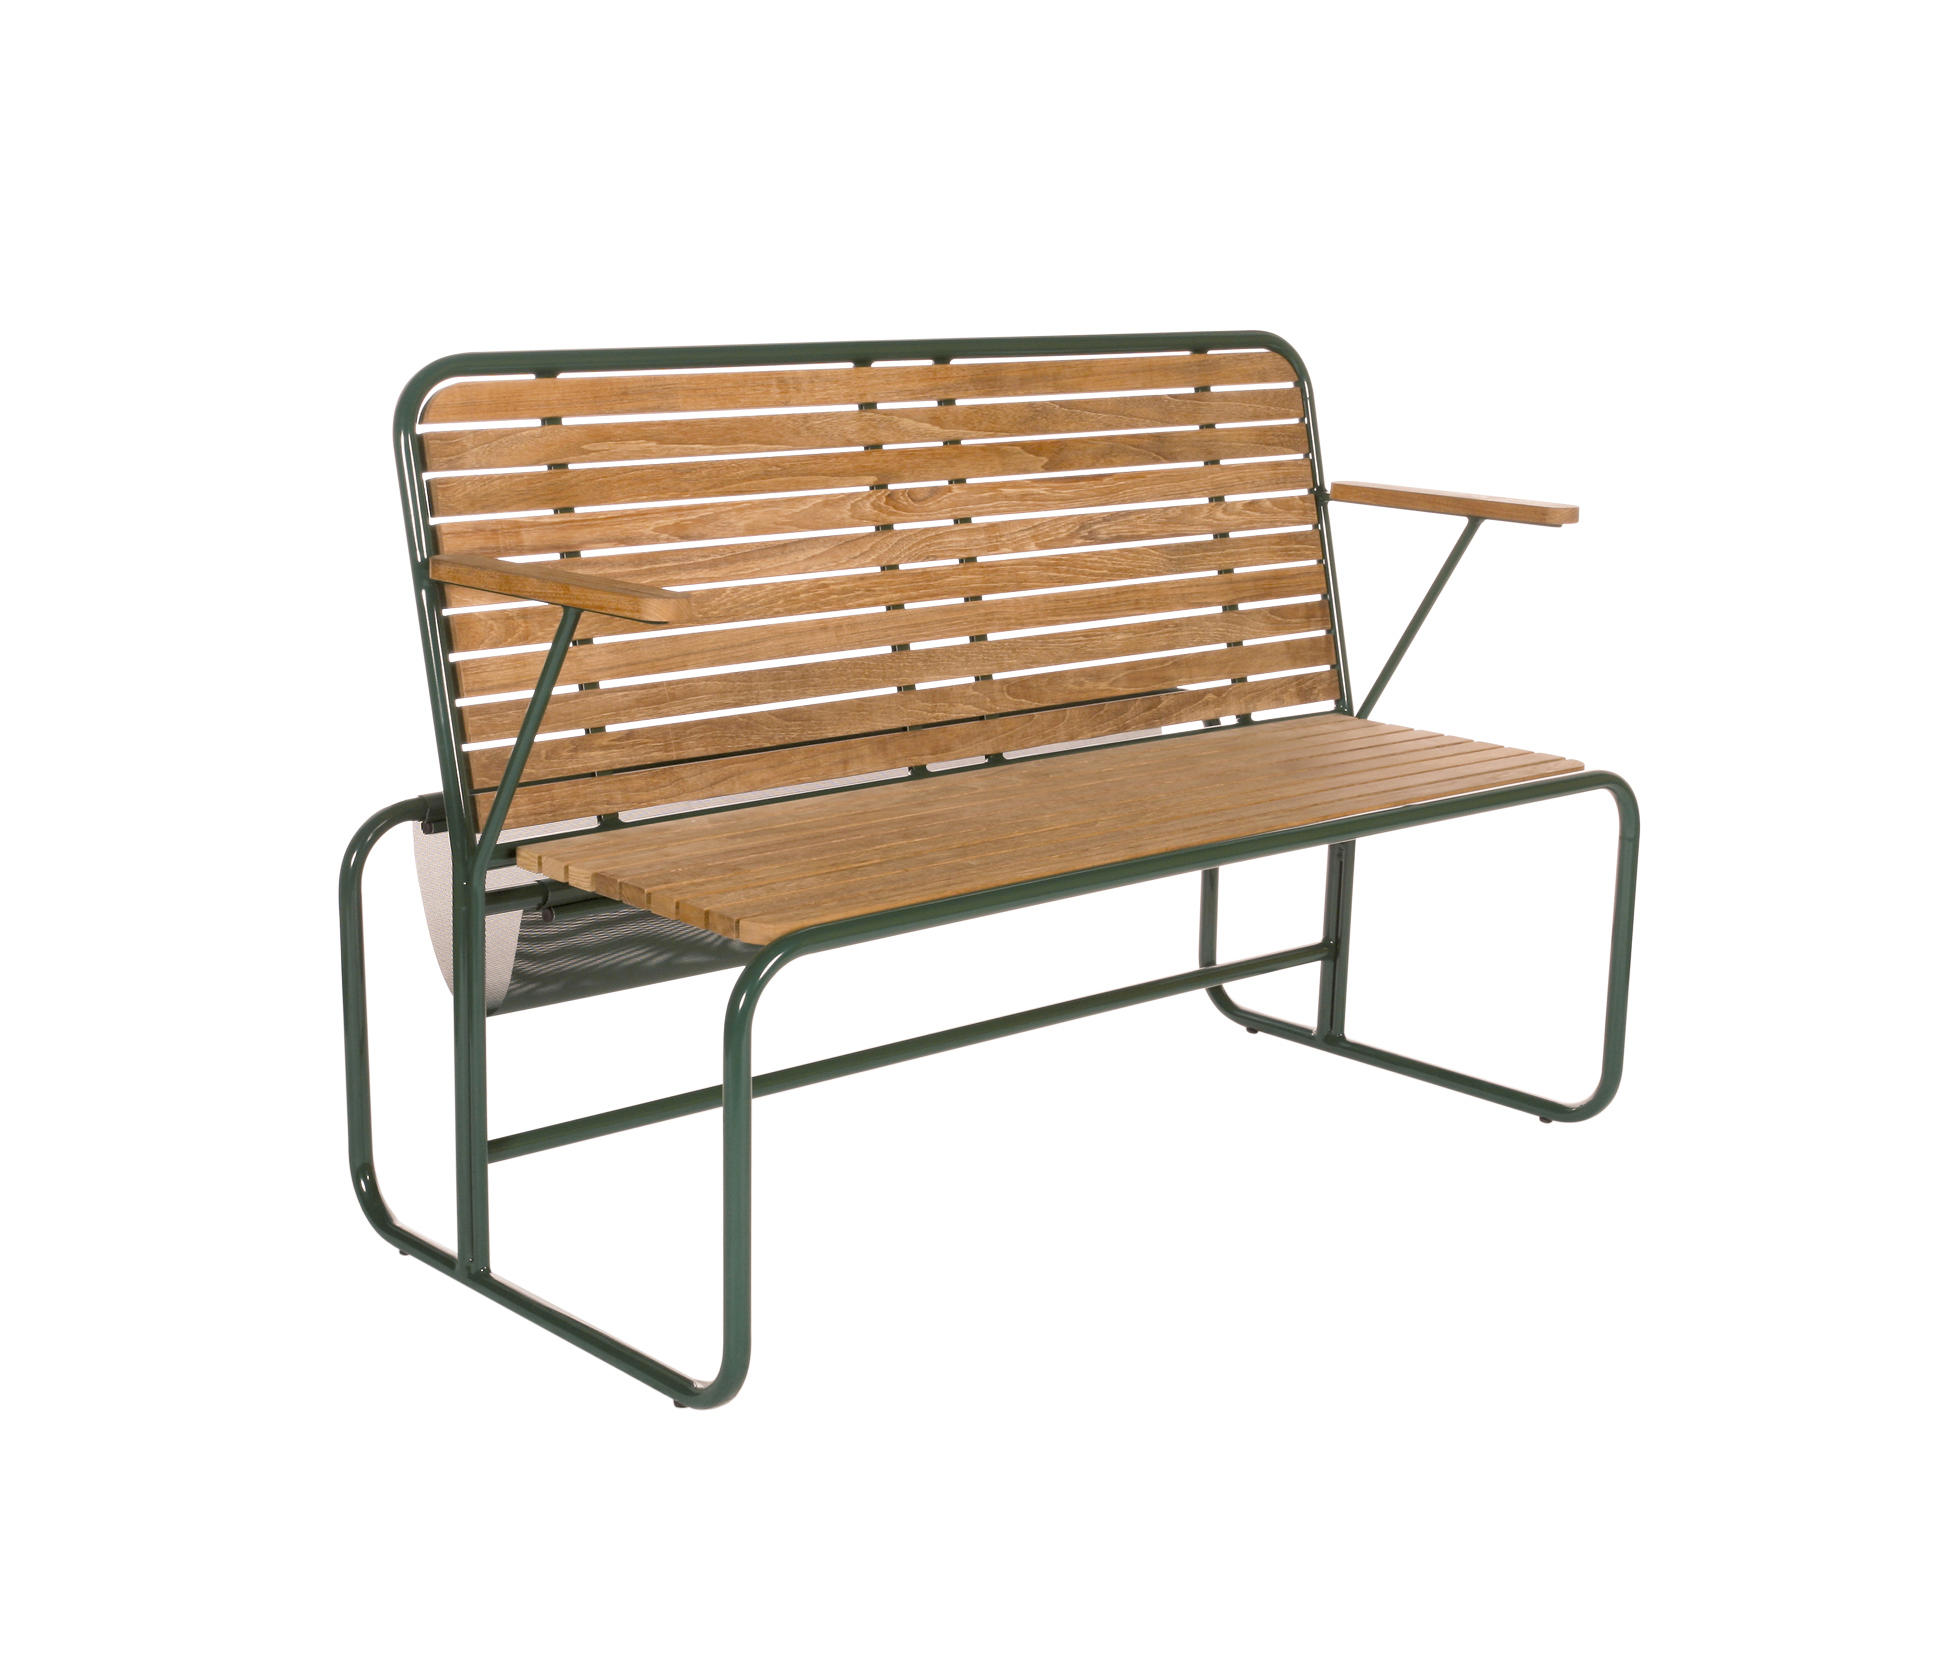 Tennis | Player's bench | Architonic